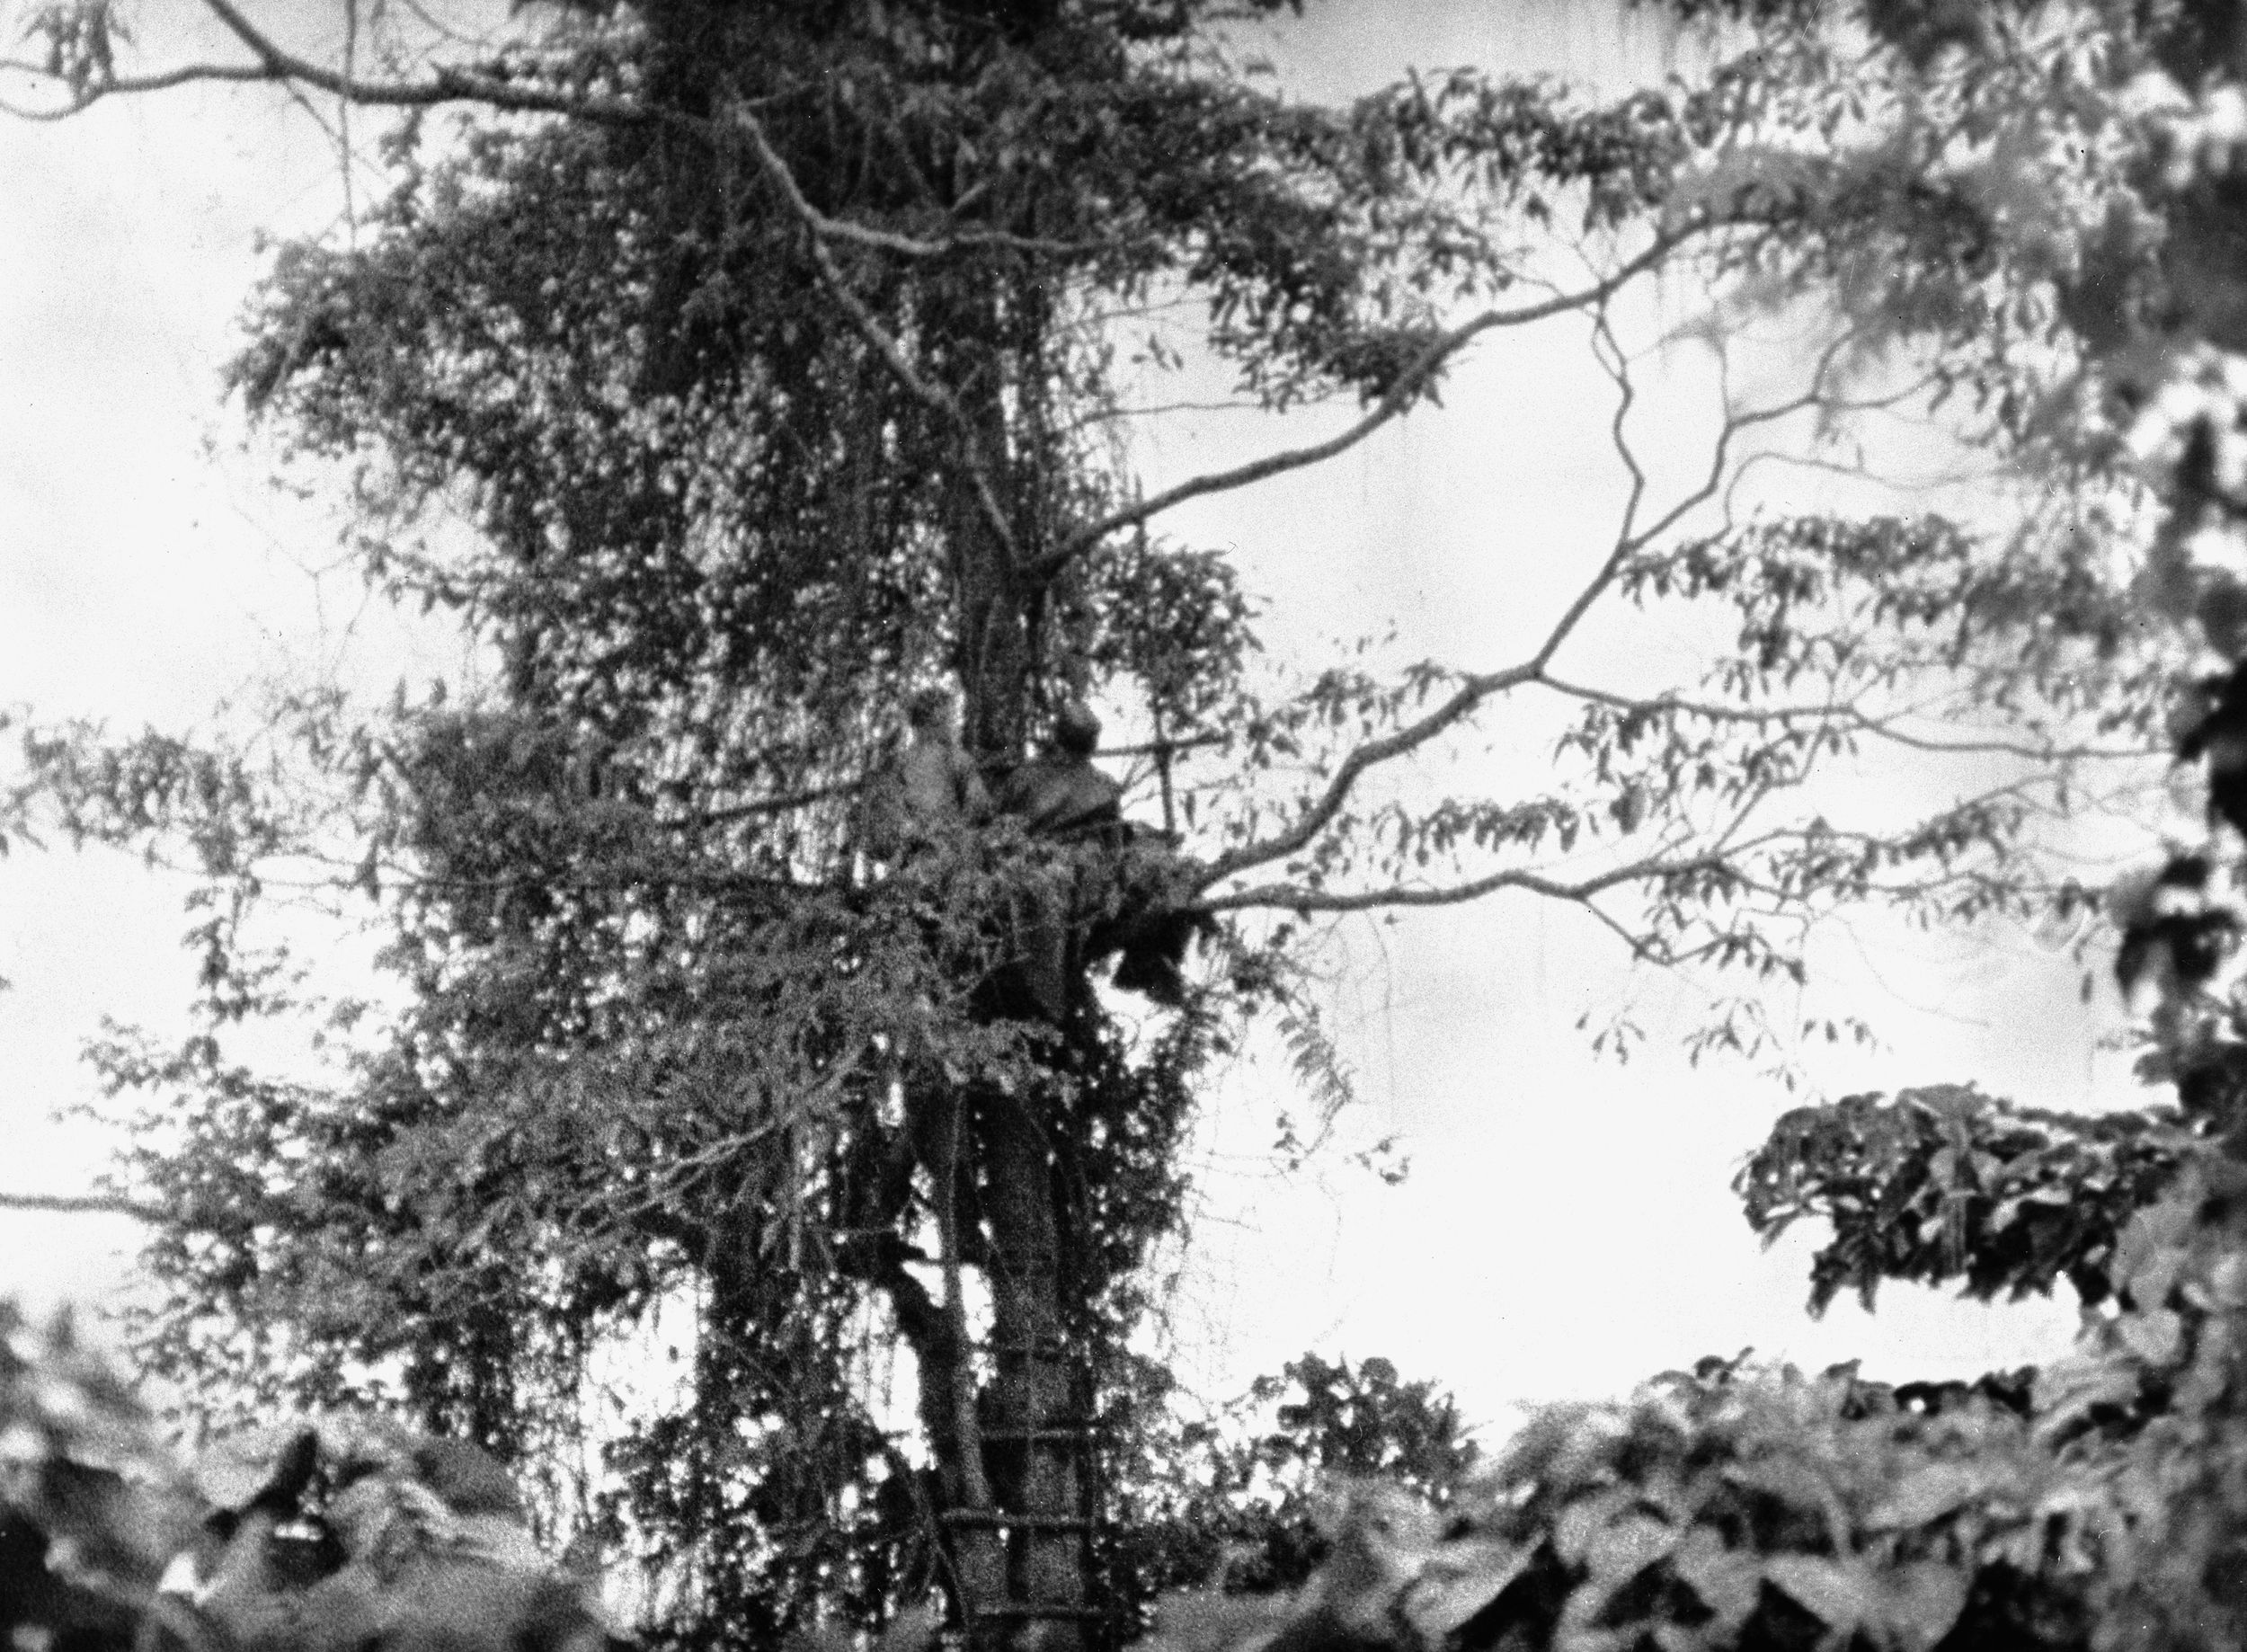 Perched in a camouflaged treetop position above Nuk Nuk in August 1942, two men of the NGVR scan the horizon for Japanese forces on the move.